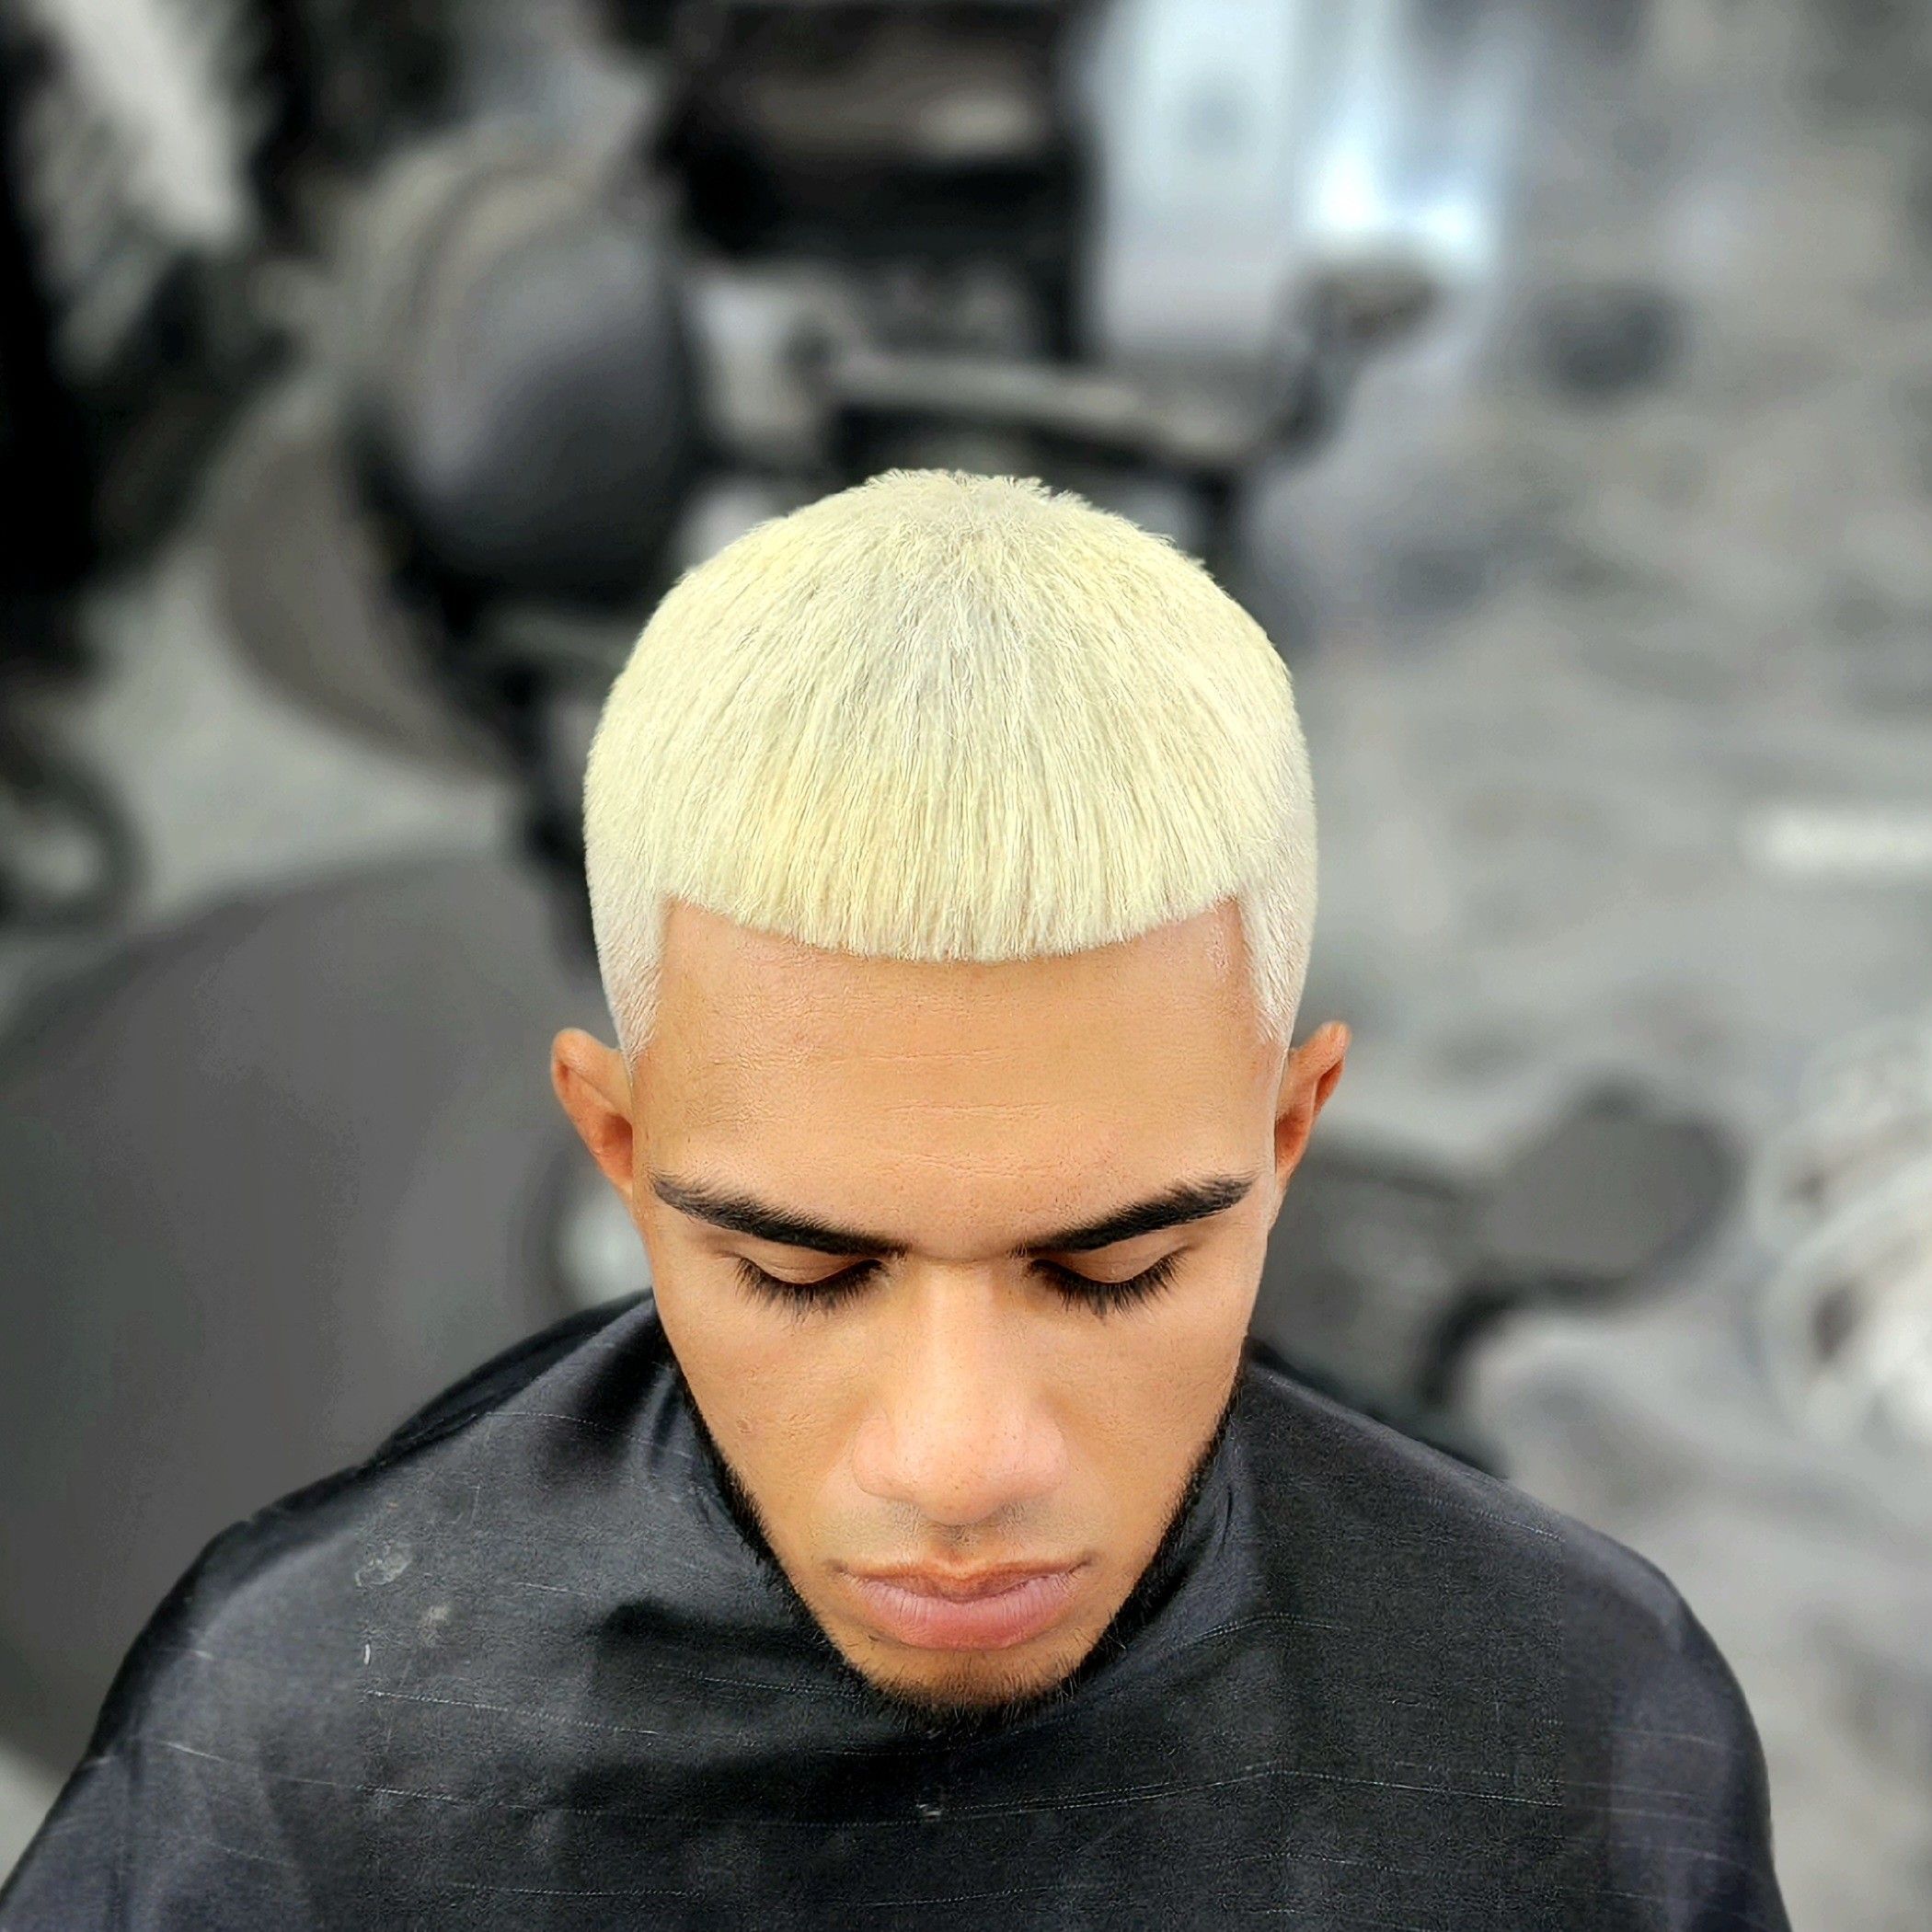 Bleach Hair & Color (Contact Me Before Booking) portfolio